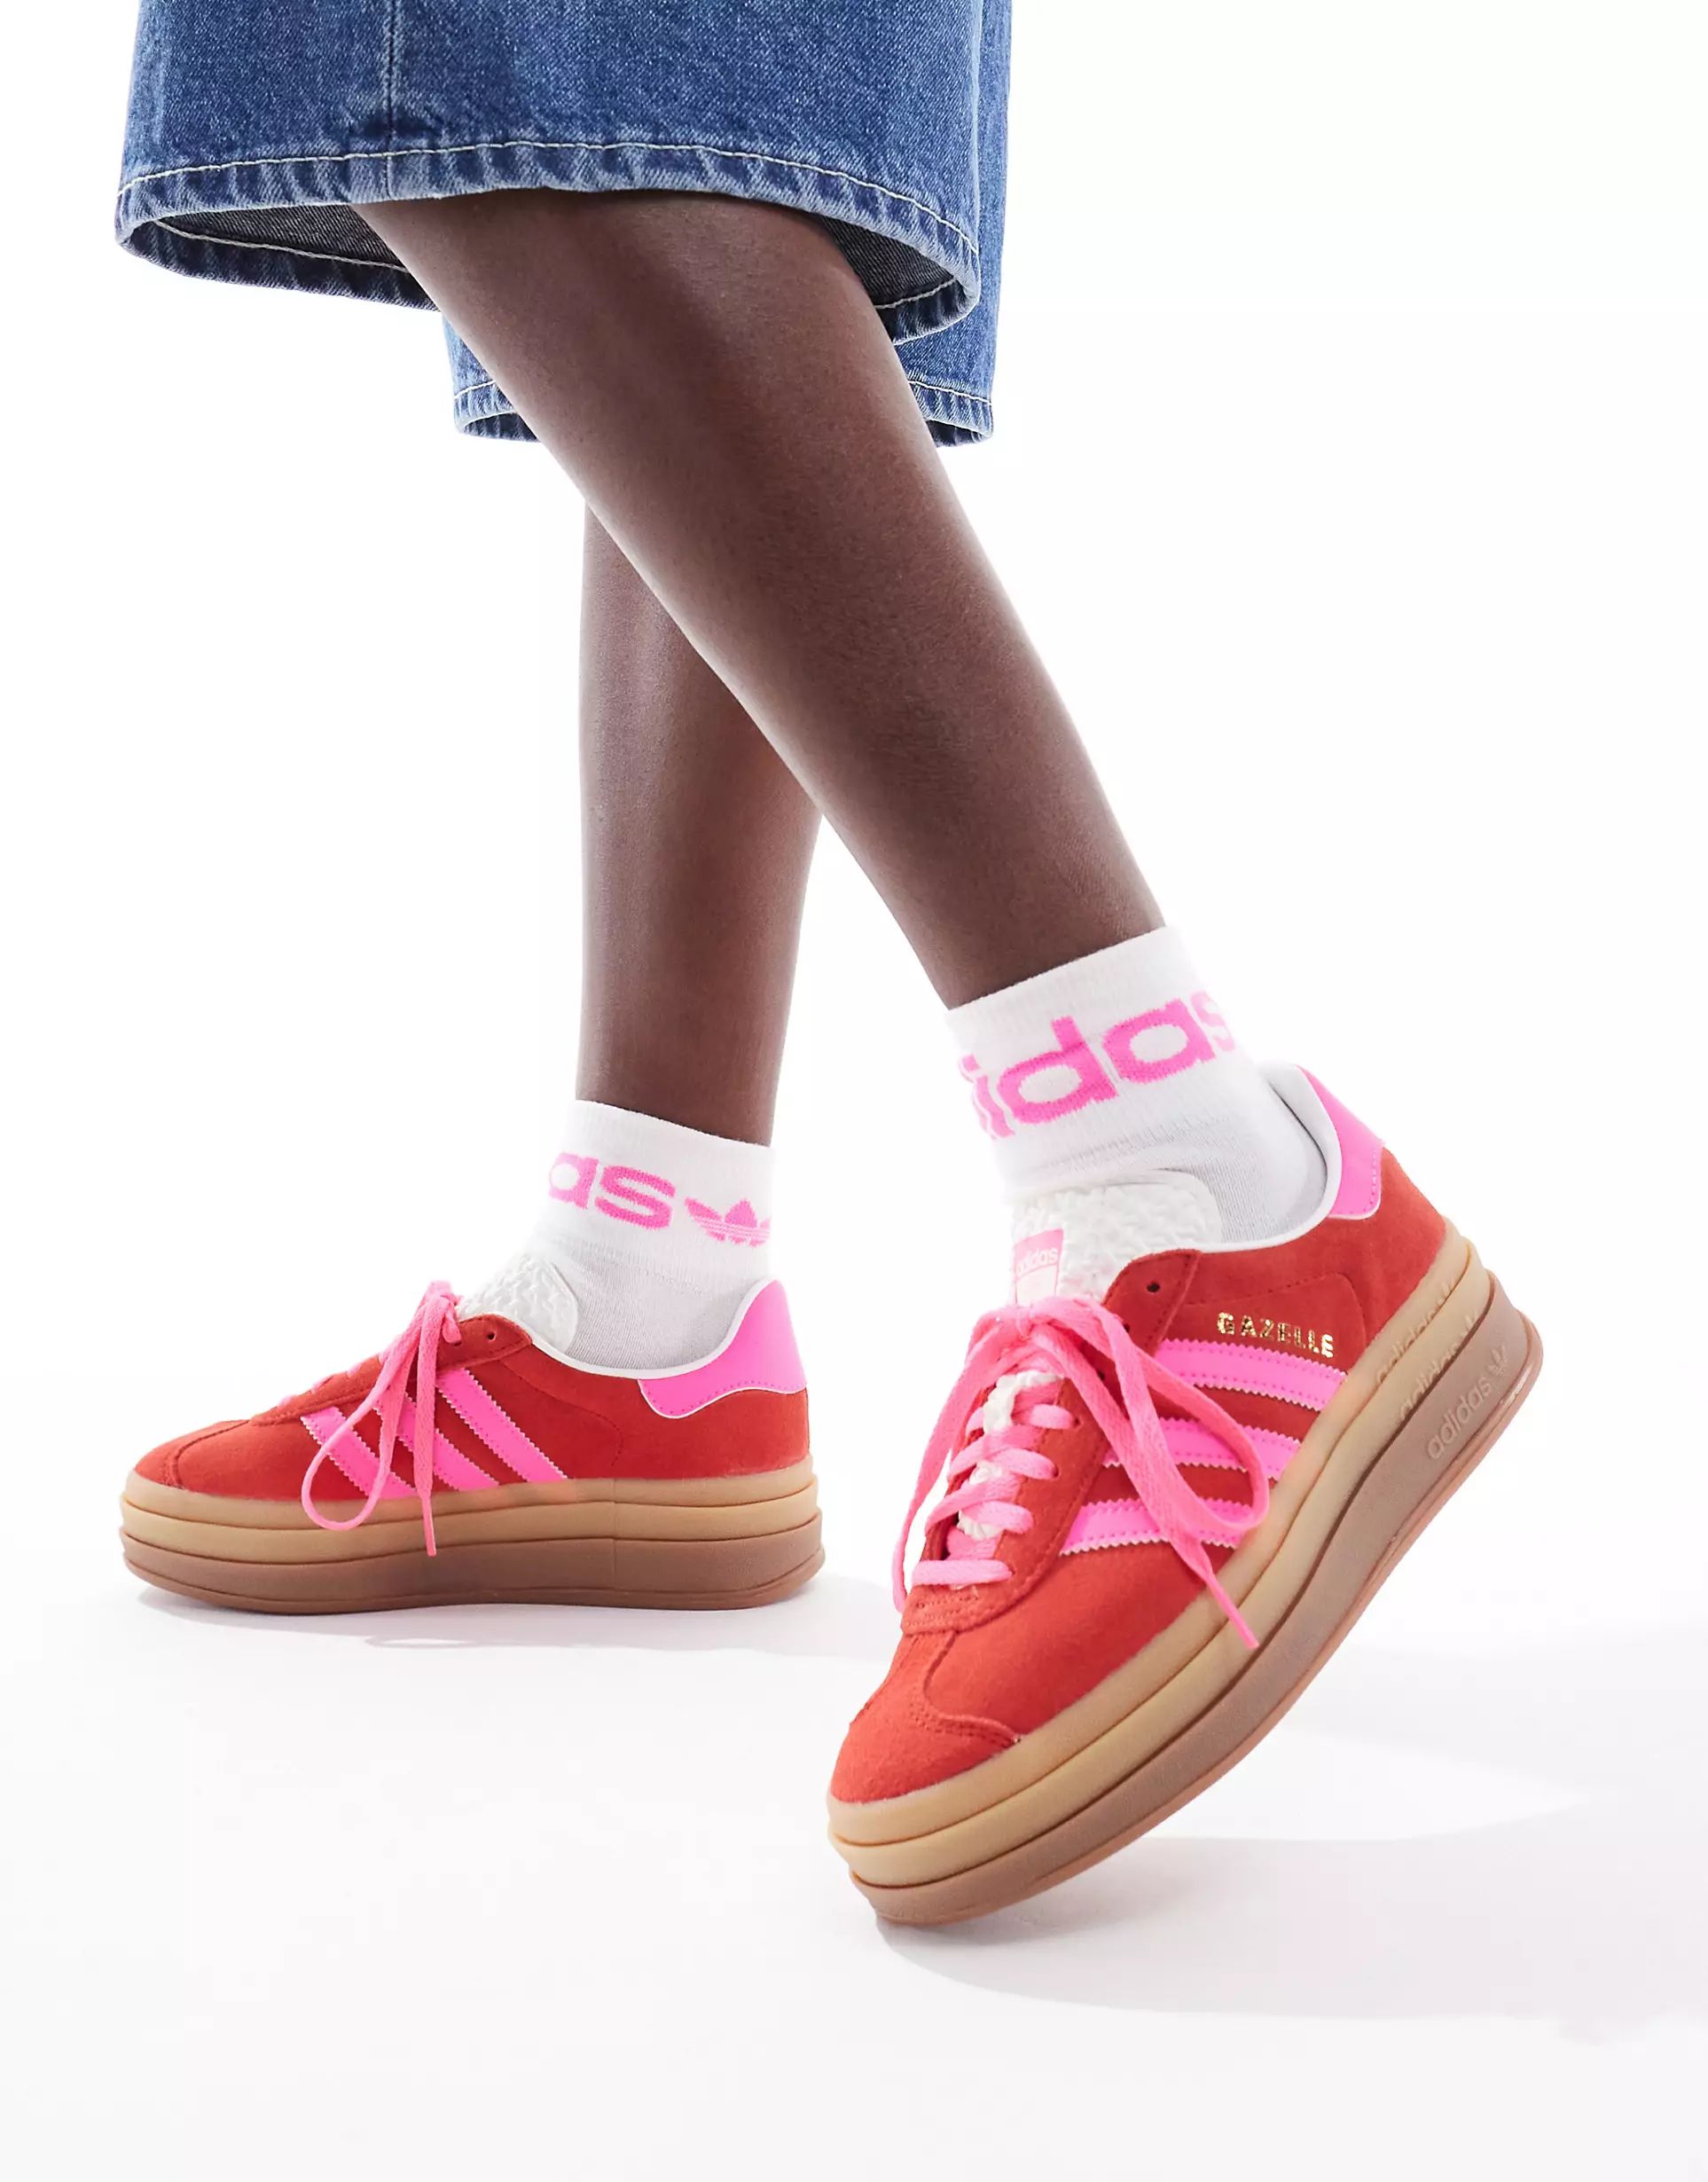 adidas Originals Gazelle Bold platform trainers in red and pink | ASOS (Global)